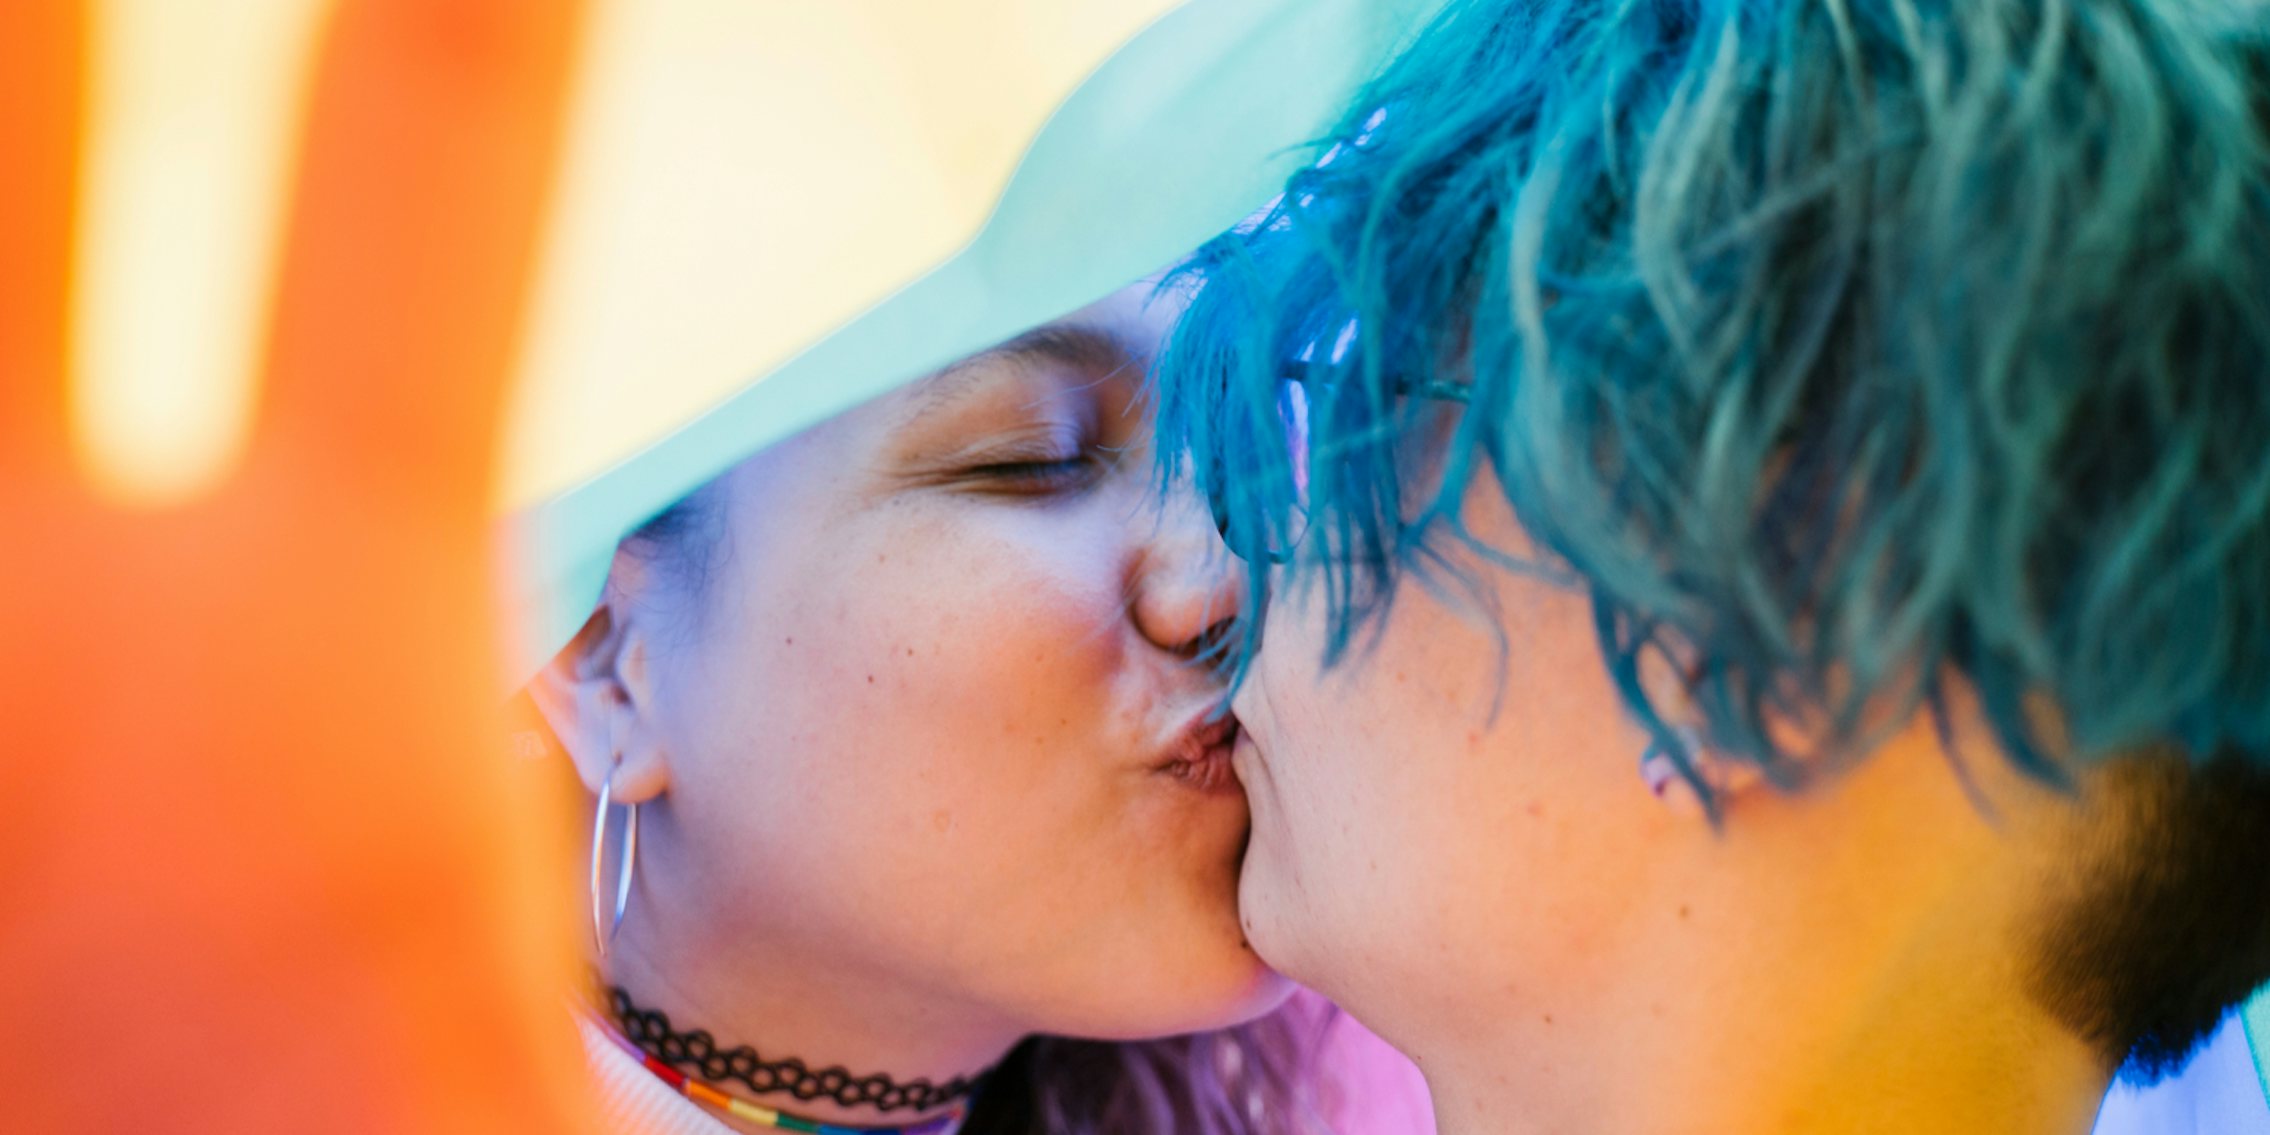 A close-up of two queer people kissing. Public displays of affection are often equated with public sex.